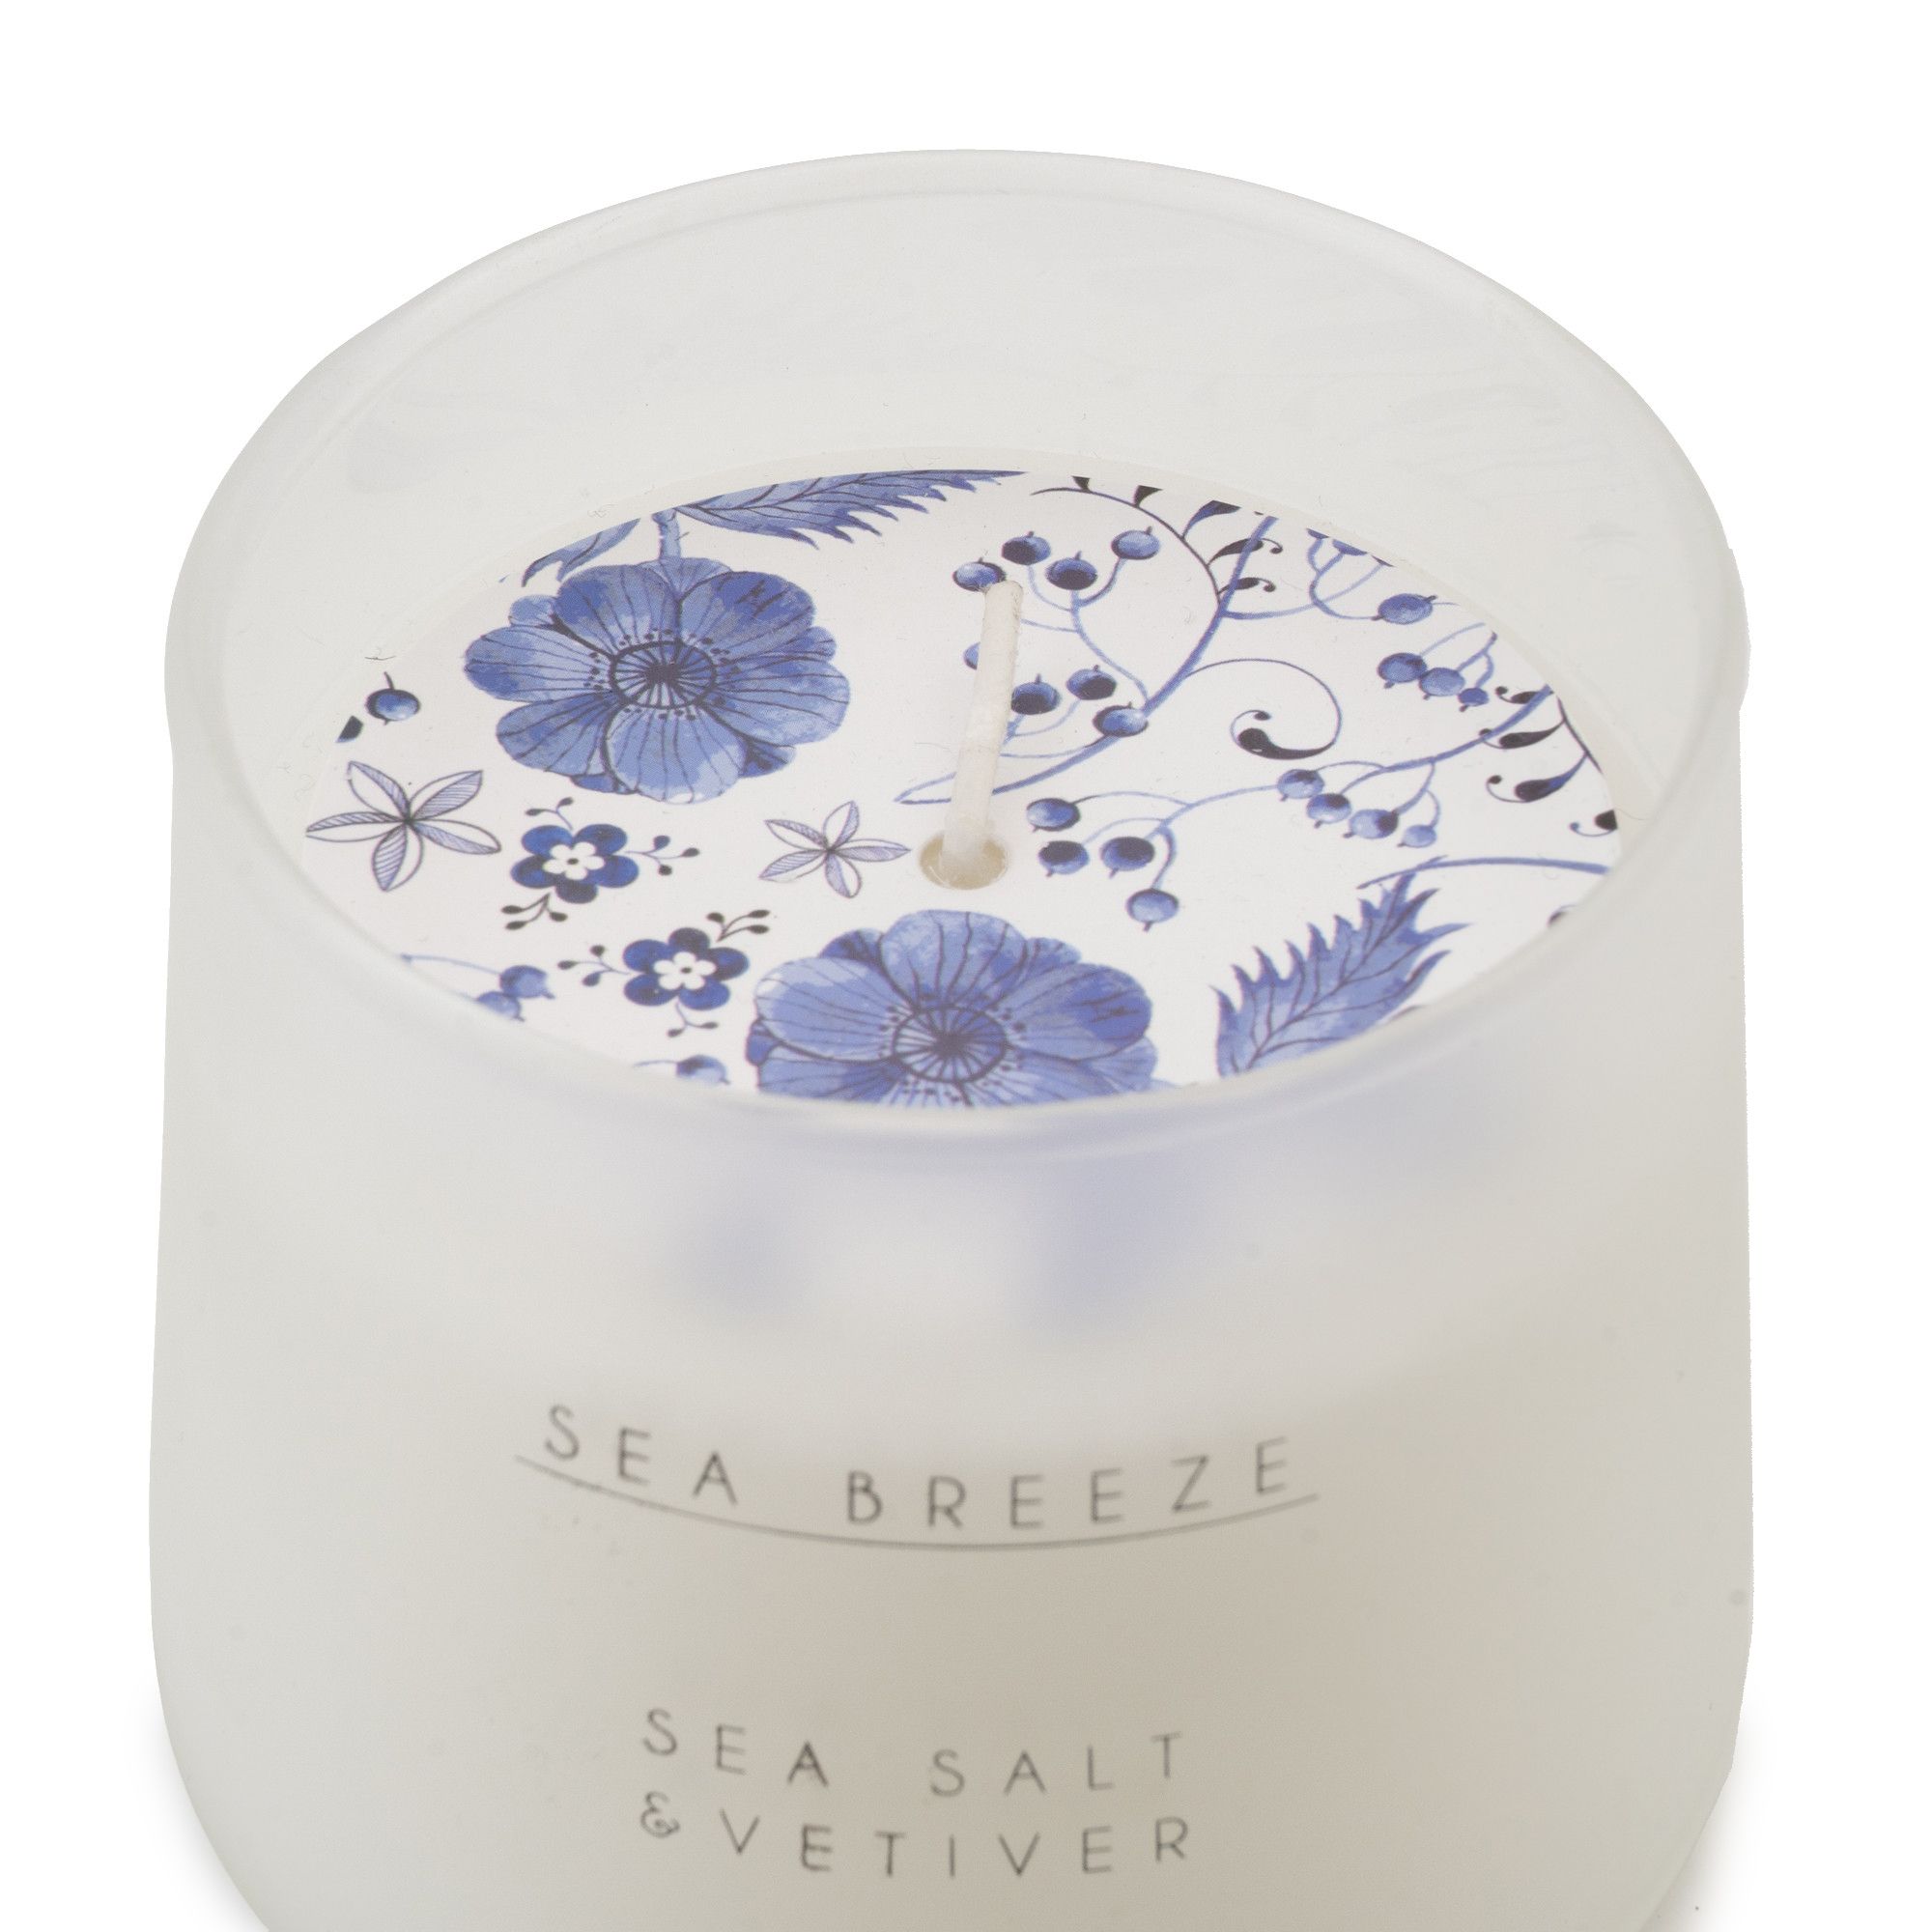 Candlelight Blue & White Frosted Sea Salt & Vetiver Medium Candle, 700g